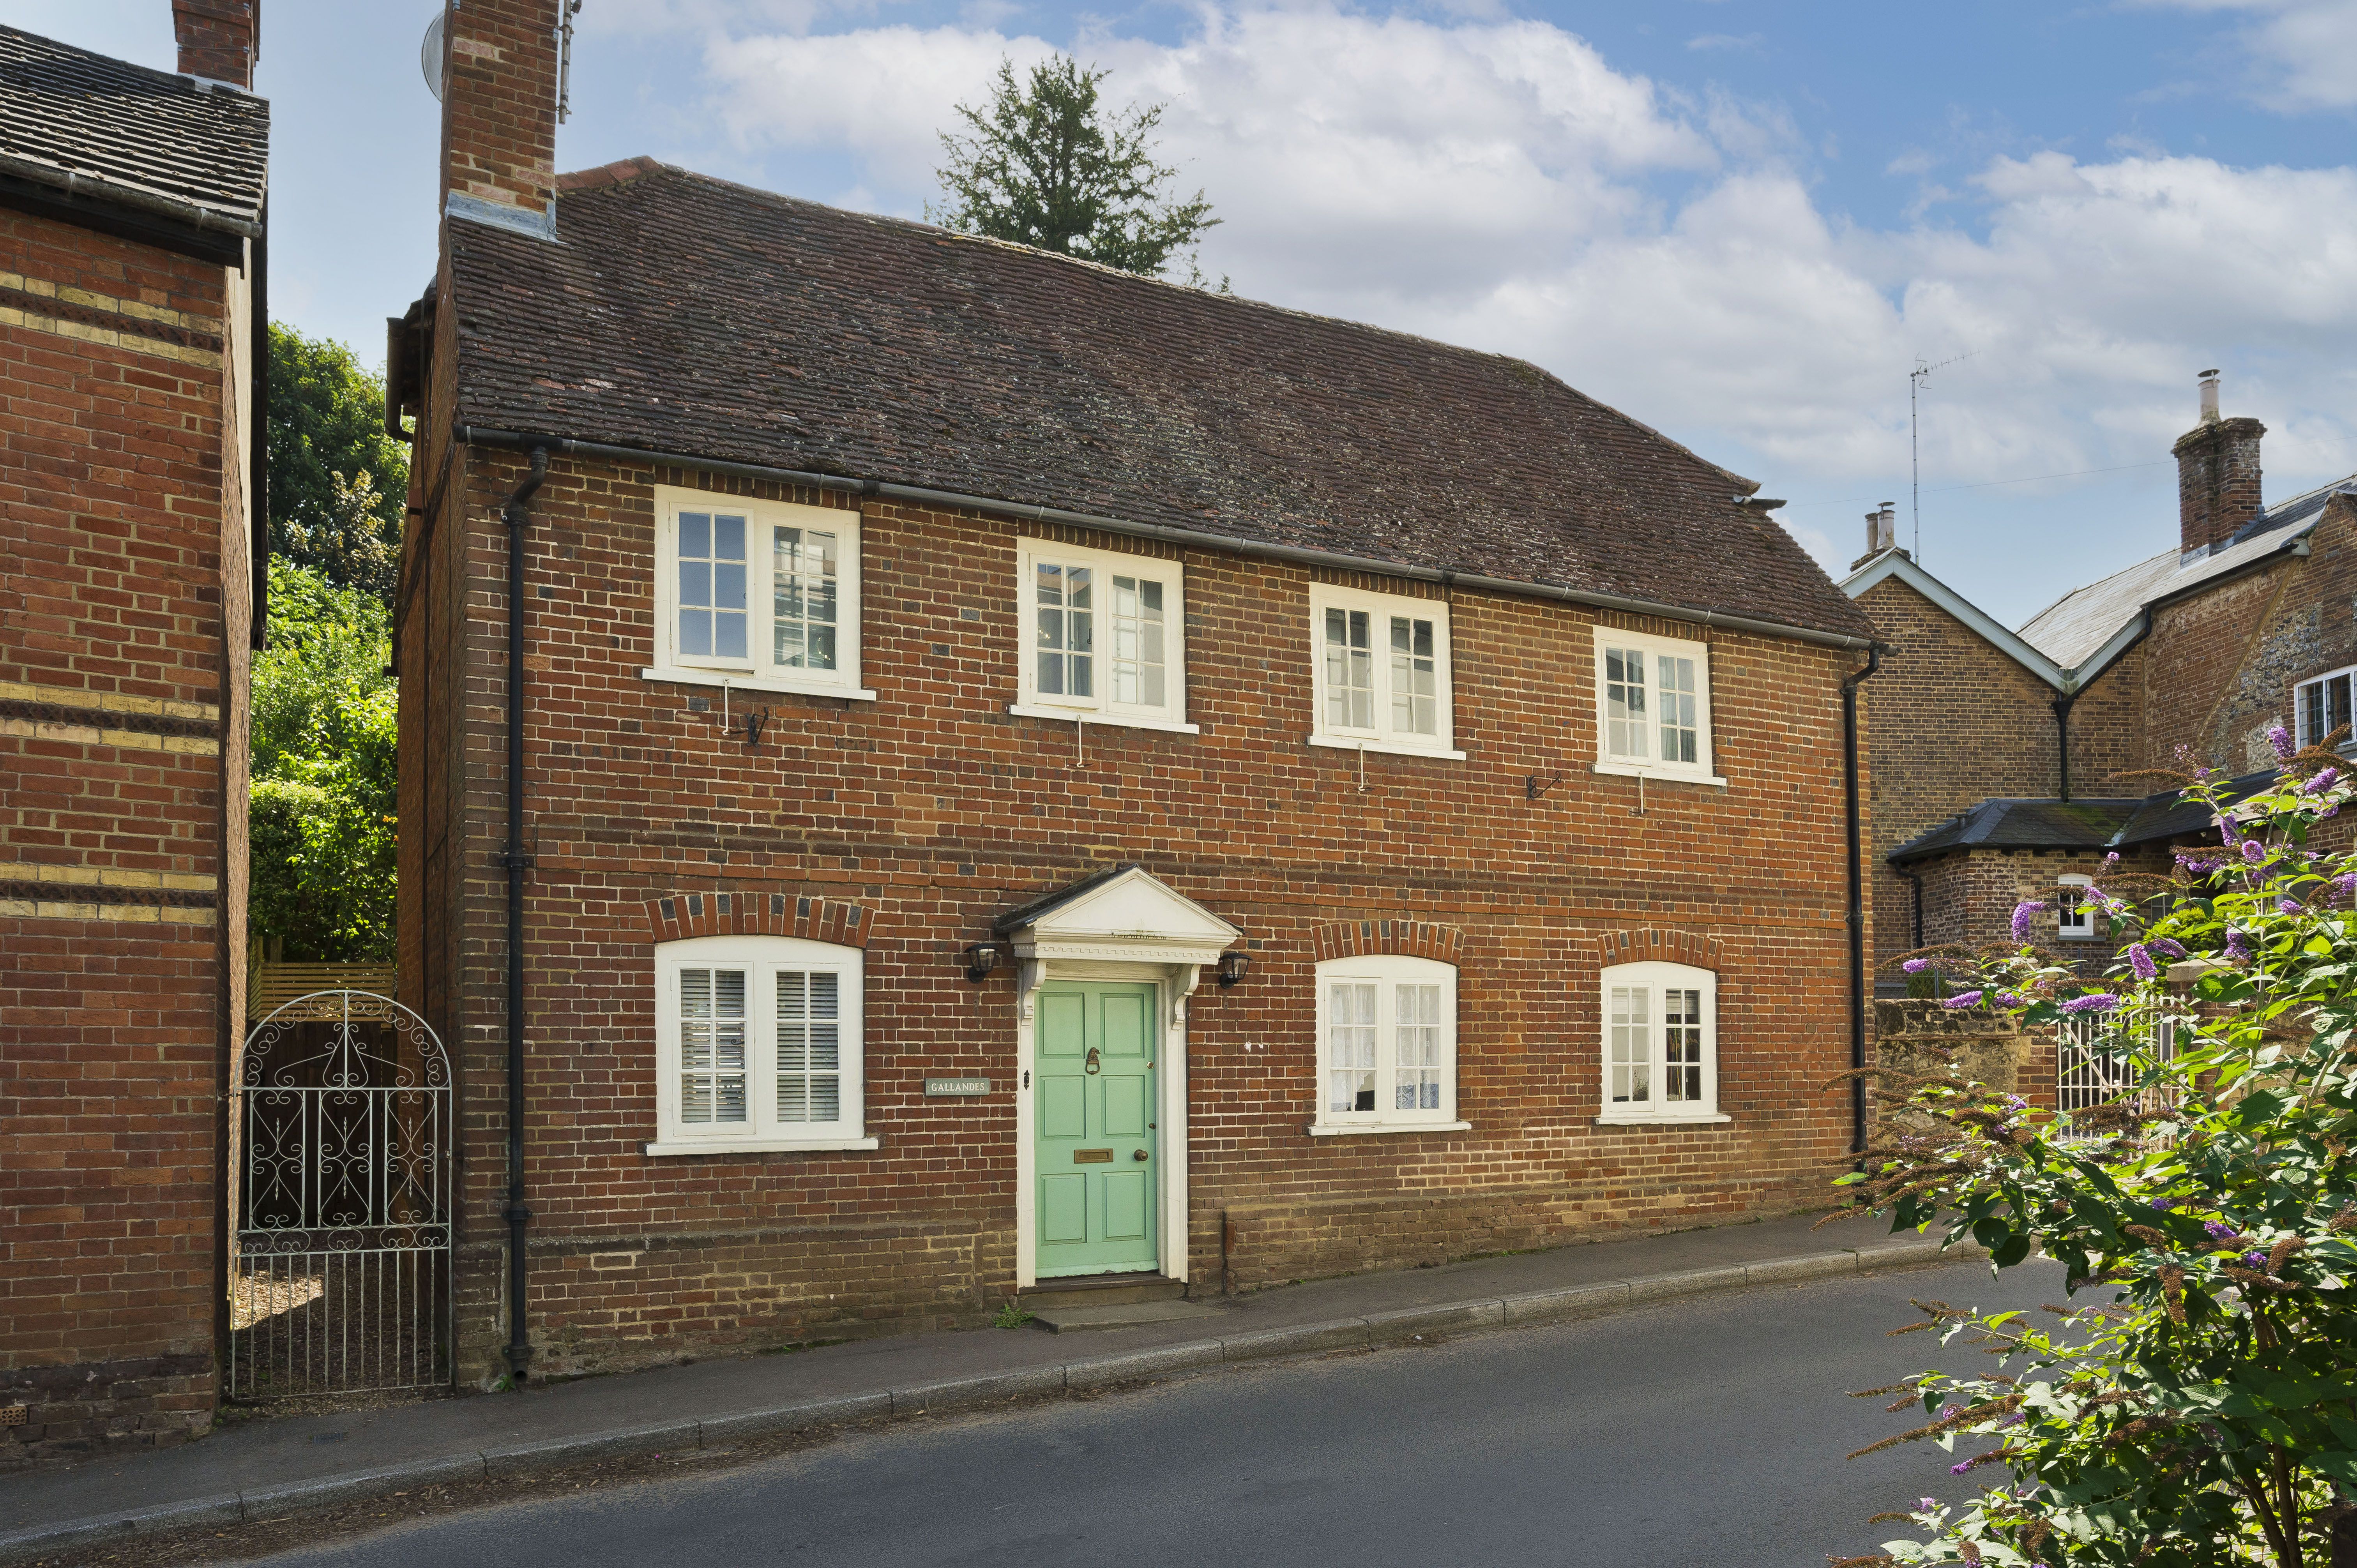 Charming cottage for sale in Shere, the picturesque village in Surrey where The Holiday was filmed